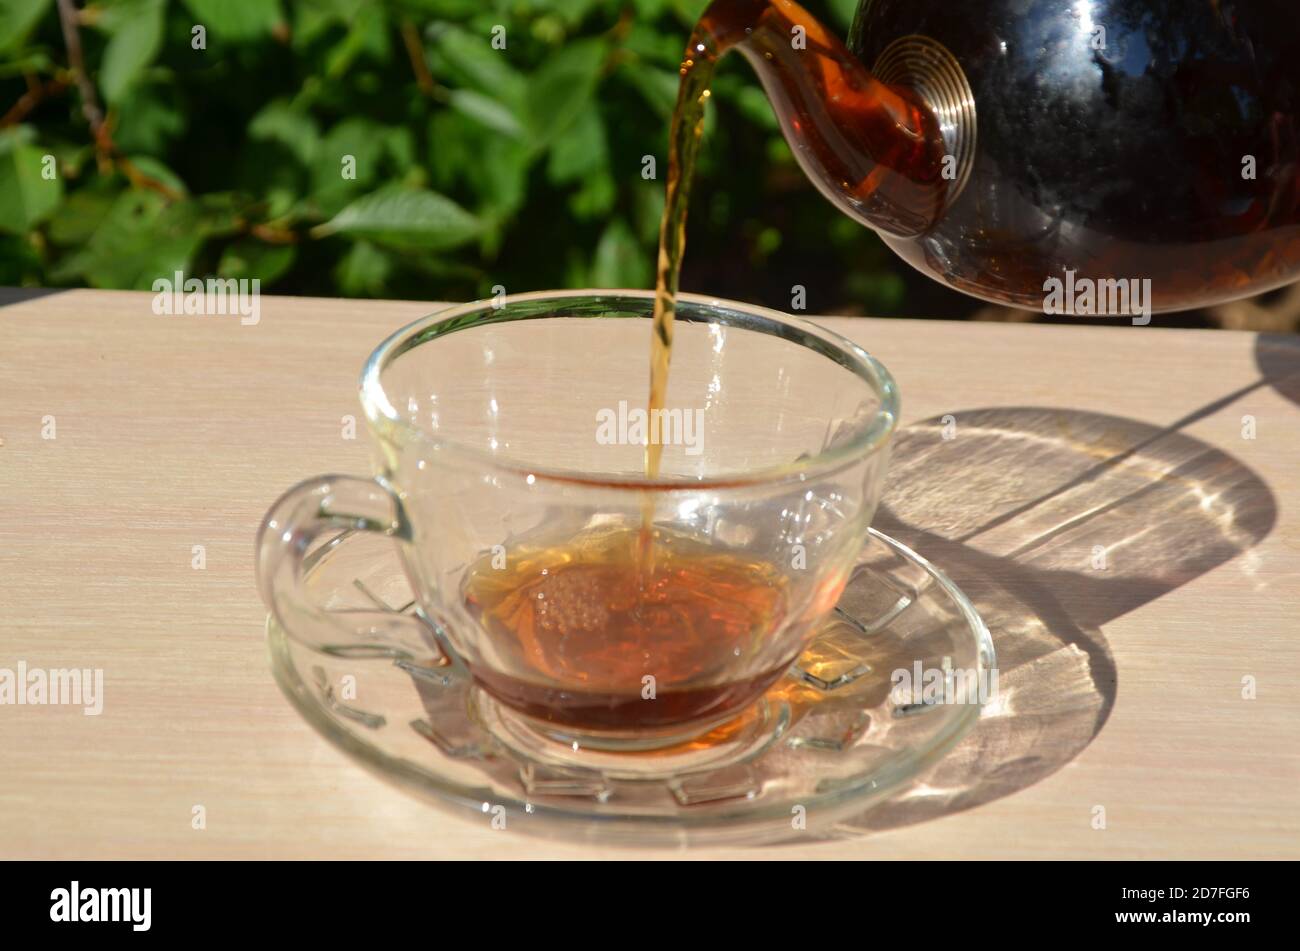 A girl pours tea from a transparent teapot into a transparent cup against a background of green foliage Good morning, outdoor cafe, energy boost. Tea Stock Photo